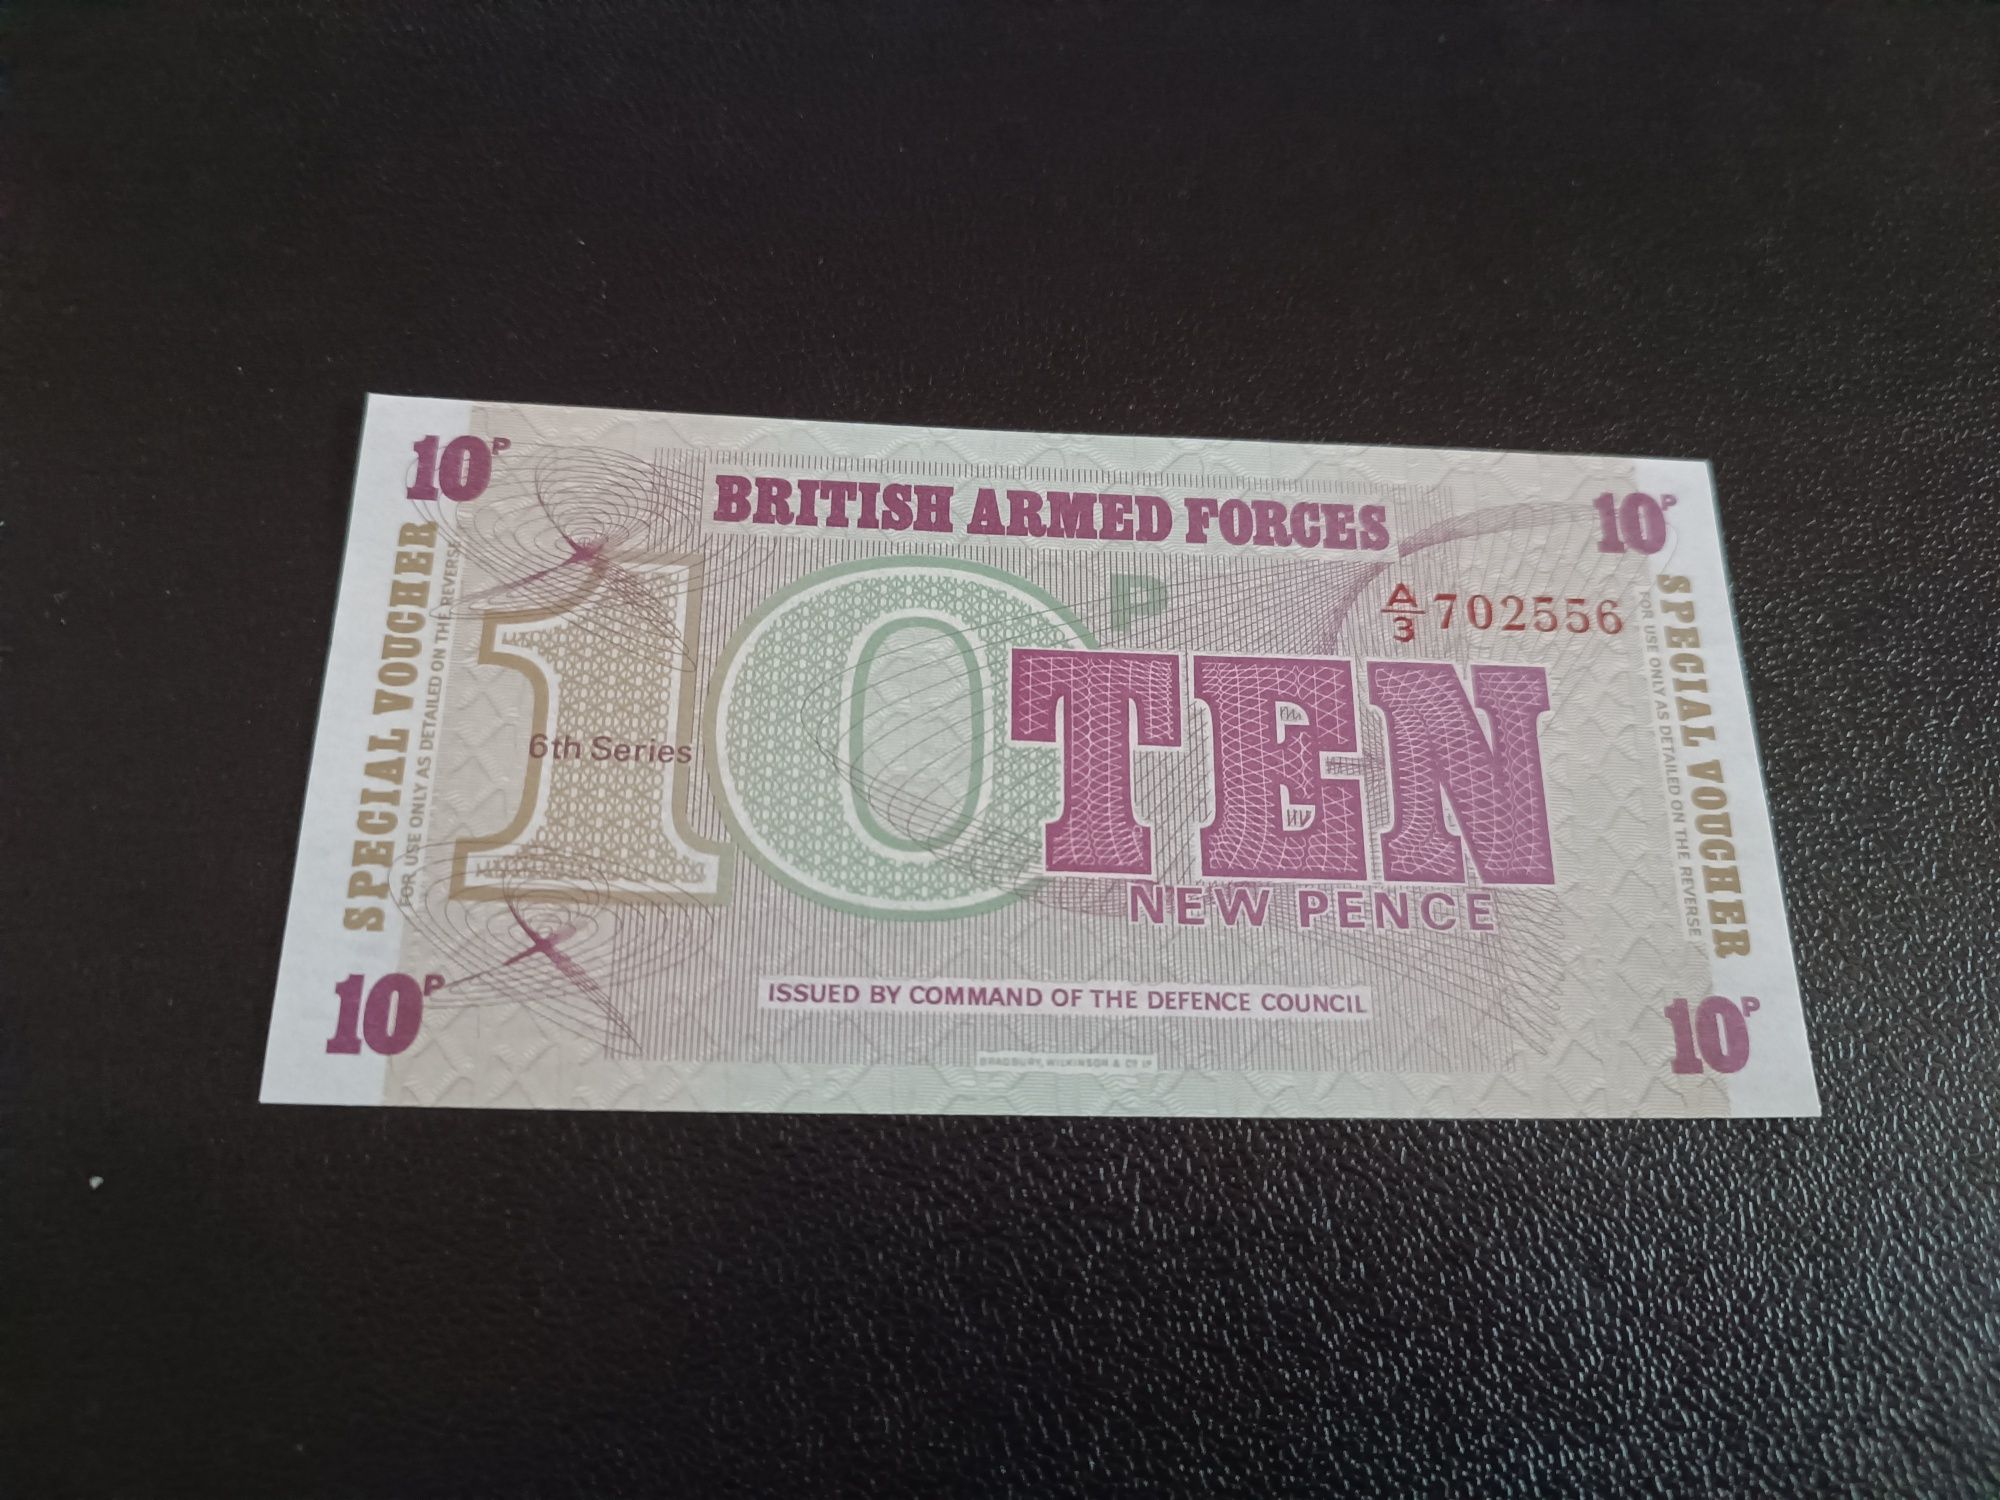 Armed FORCES 10 new pence